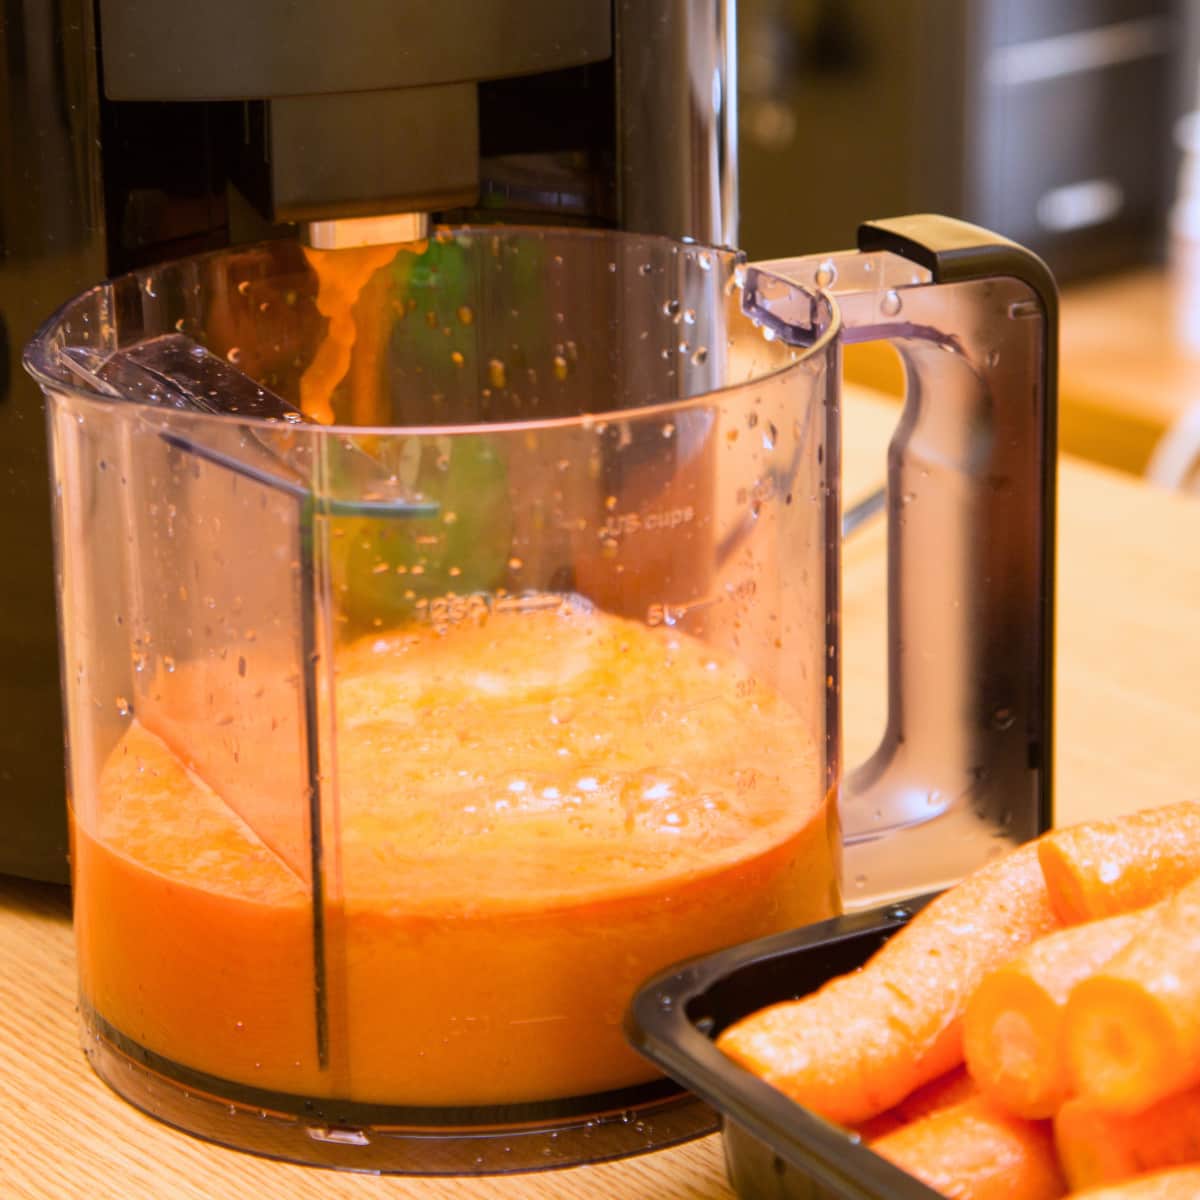 Fresh juice coming out of a juicer.